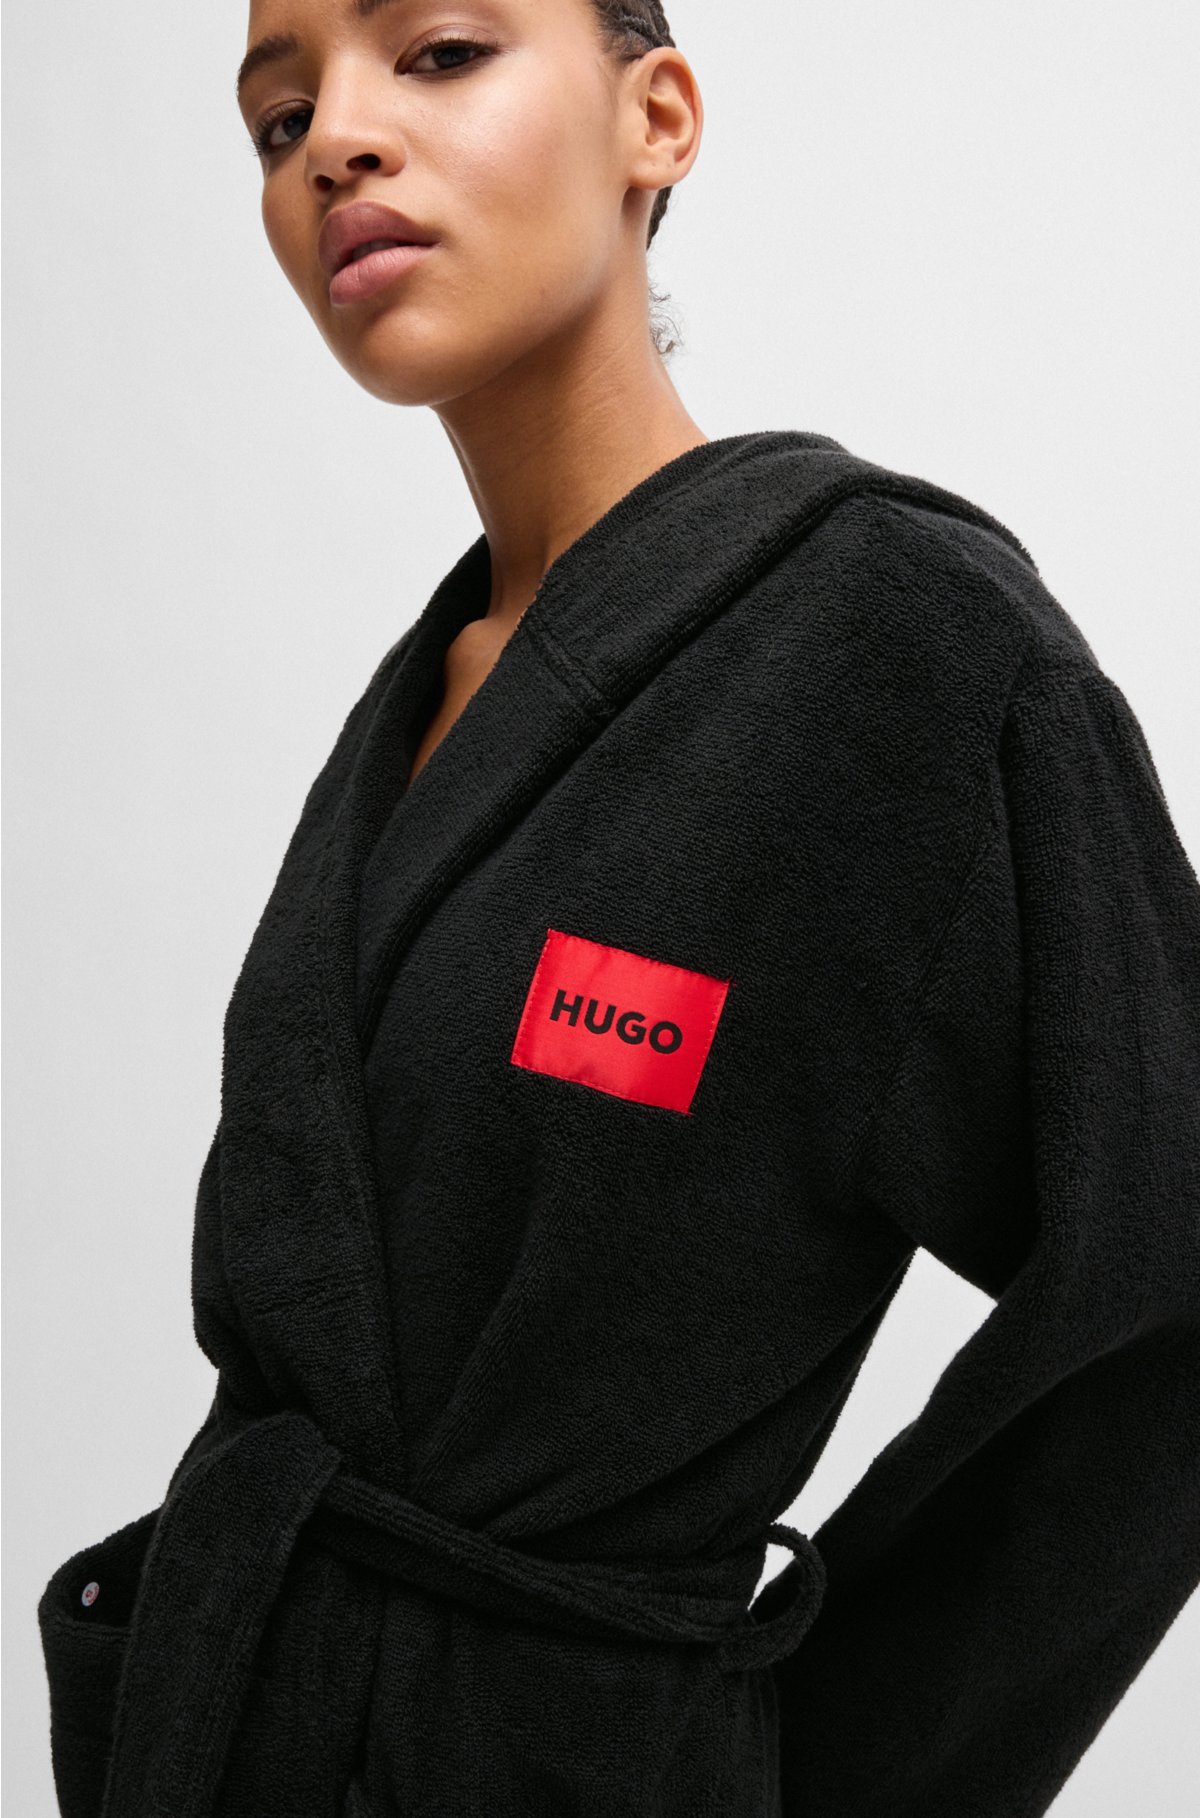 Cotton-terry dressing gown with red logo label, Black